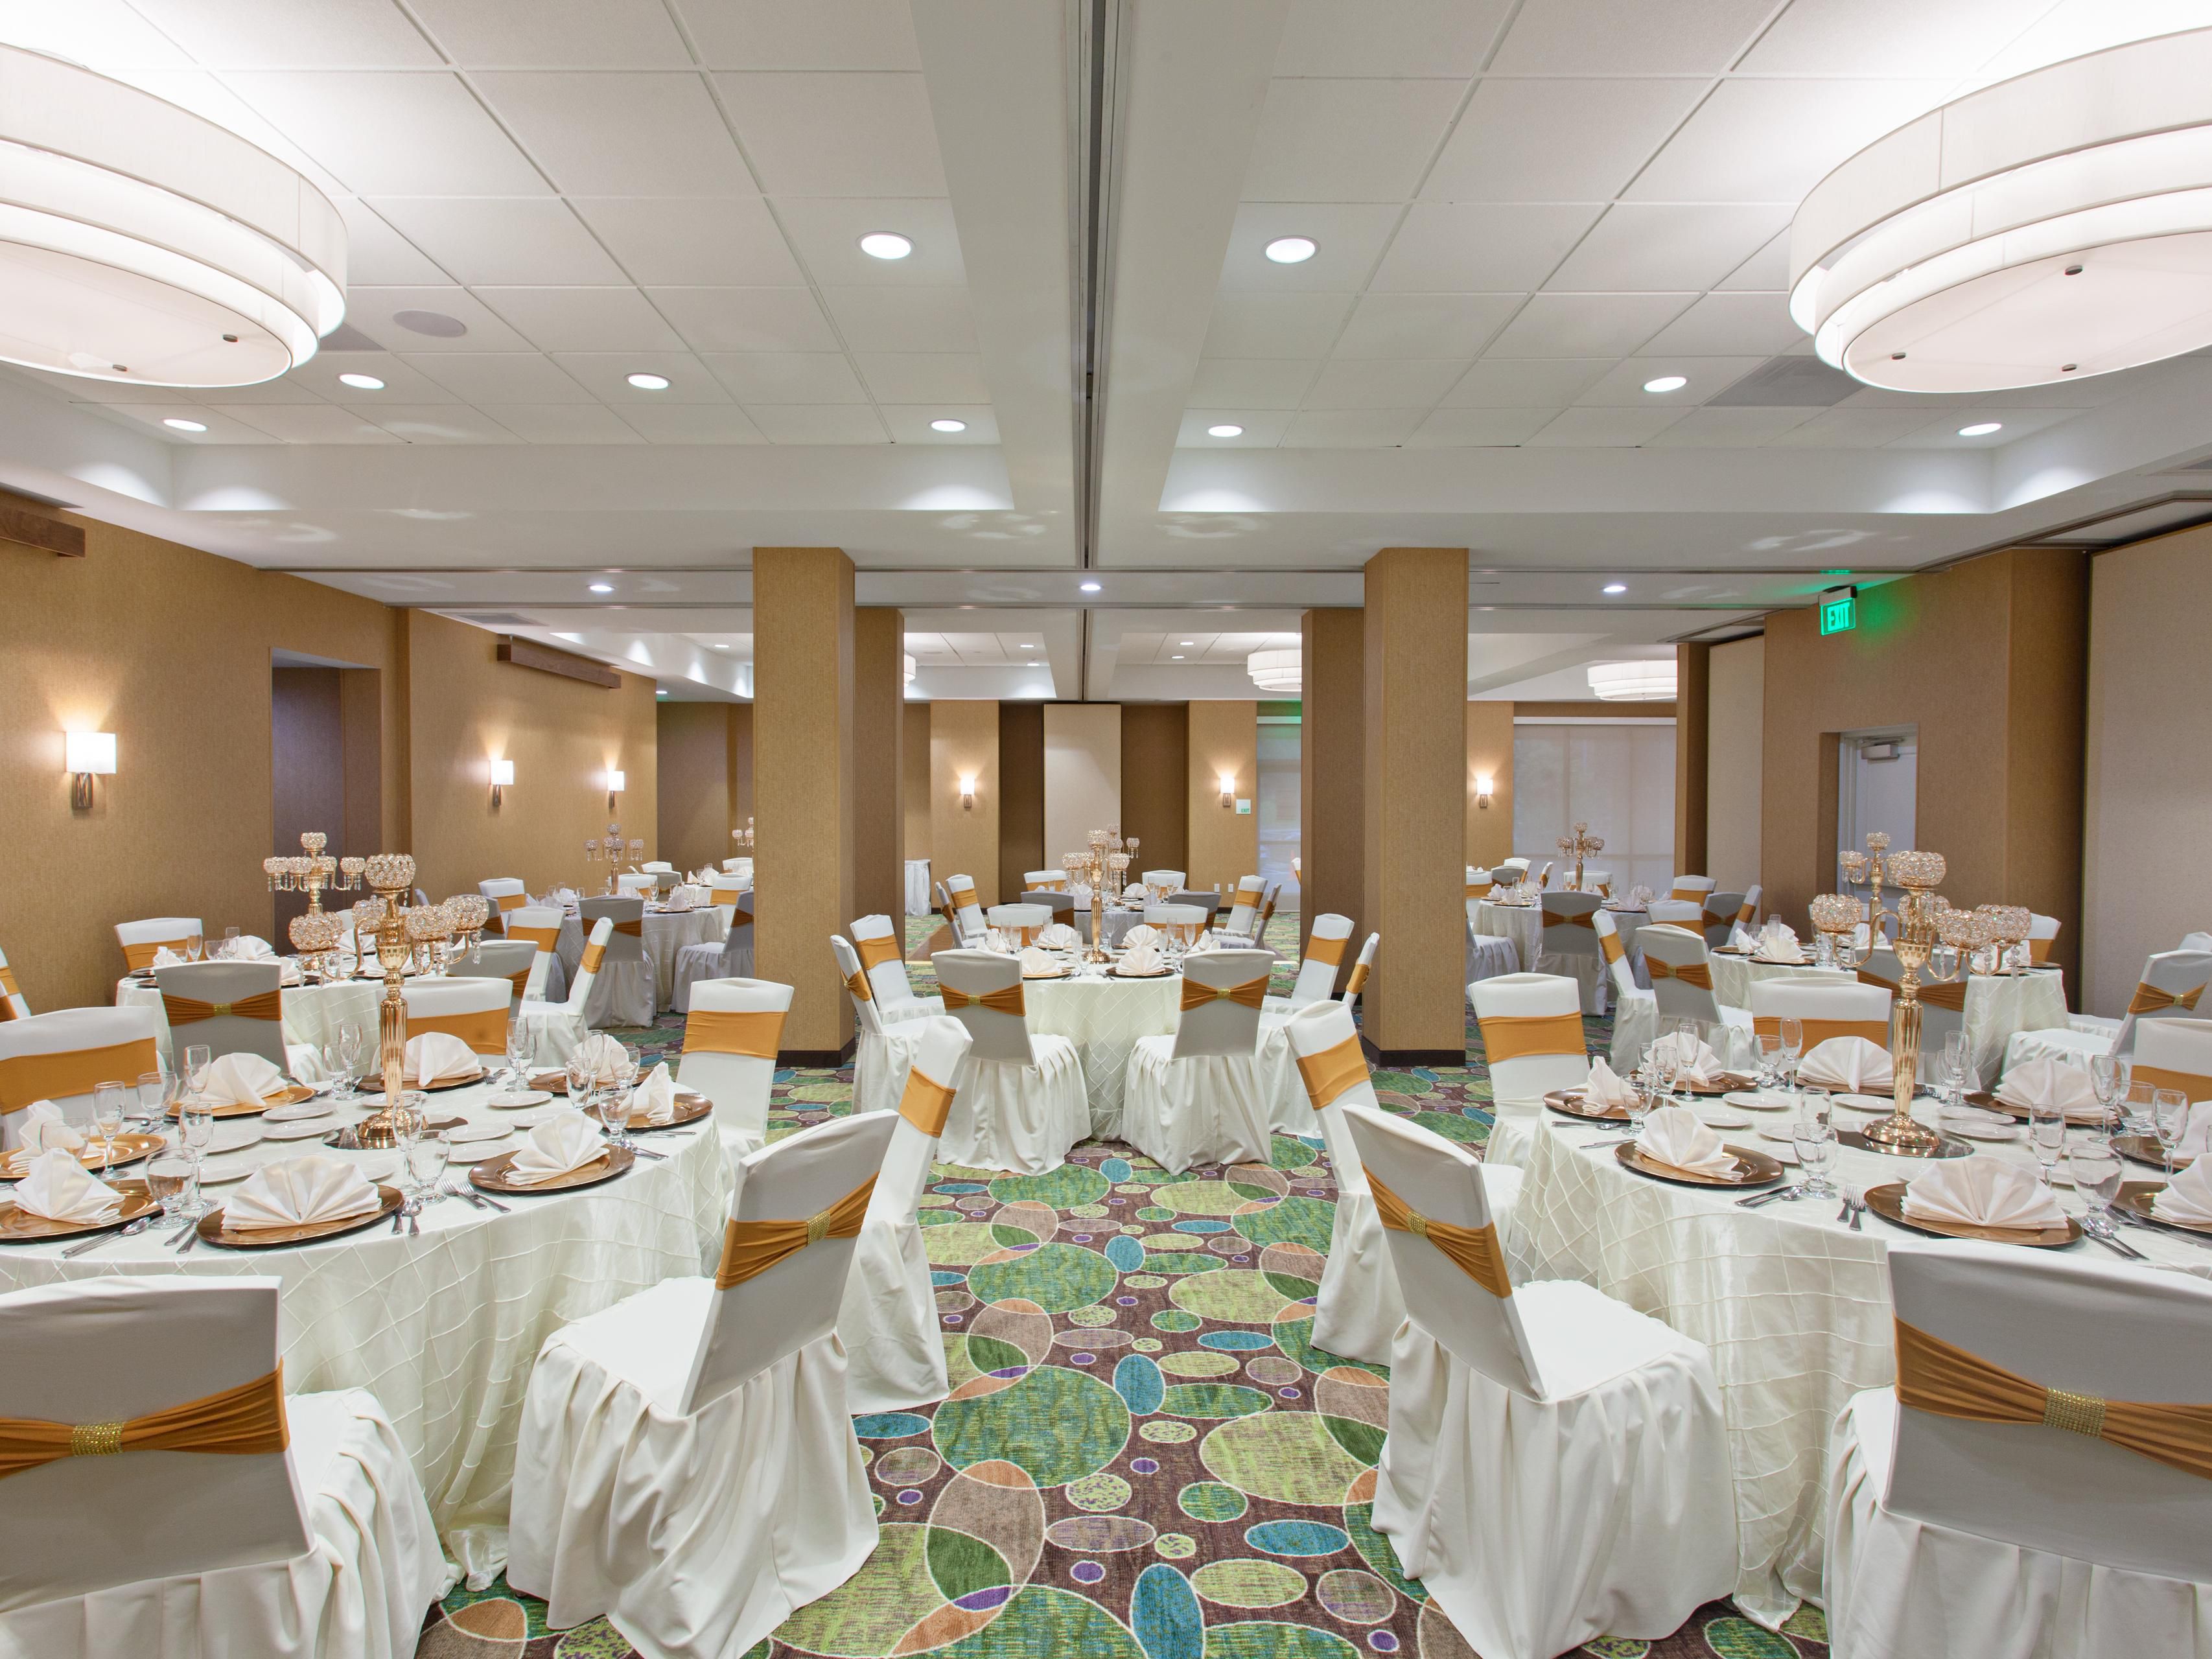 Looking for a venue?  Weddings, Quinceañeras, business meetings, birthdays; you name it, we’ll take care of you. Located near LAX and Ontario airport, guests can take advantage of the convenient location. If the event starts early or runs late, guests won’t have to leave the building for sleeping accommodations a full bar, restaurant, and catering.